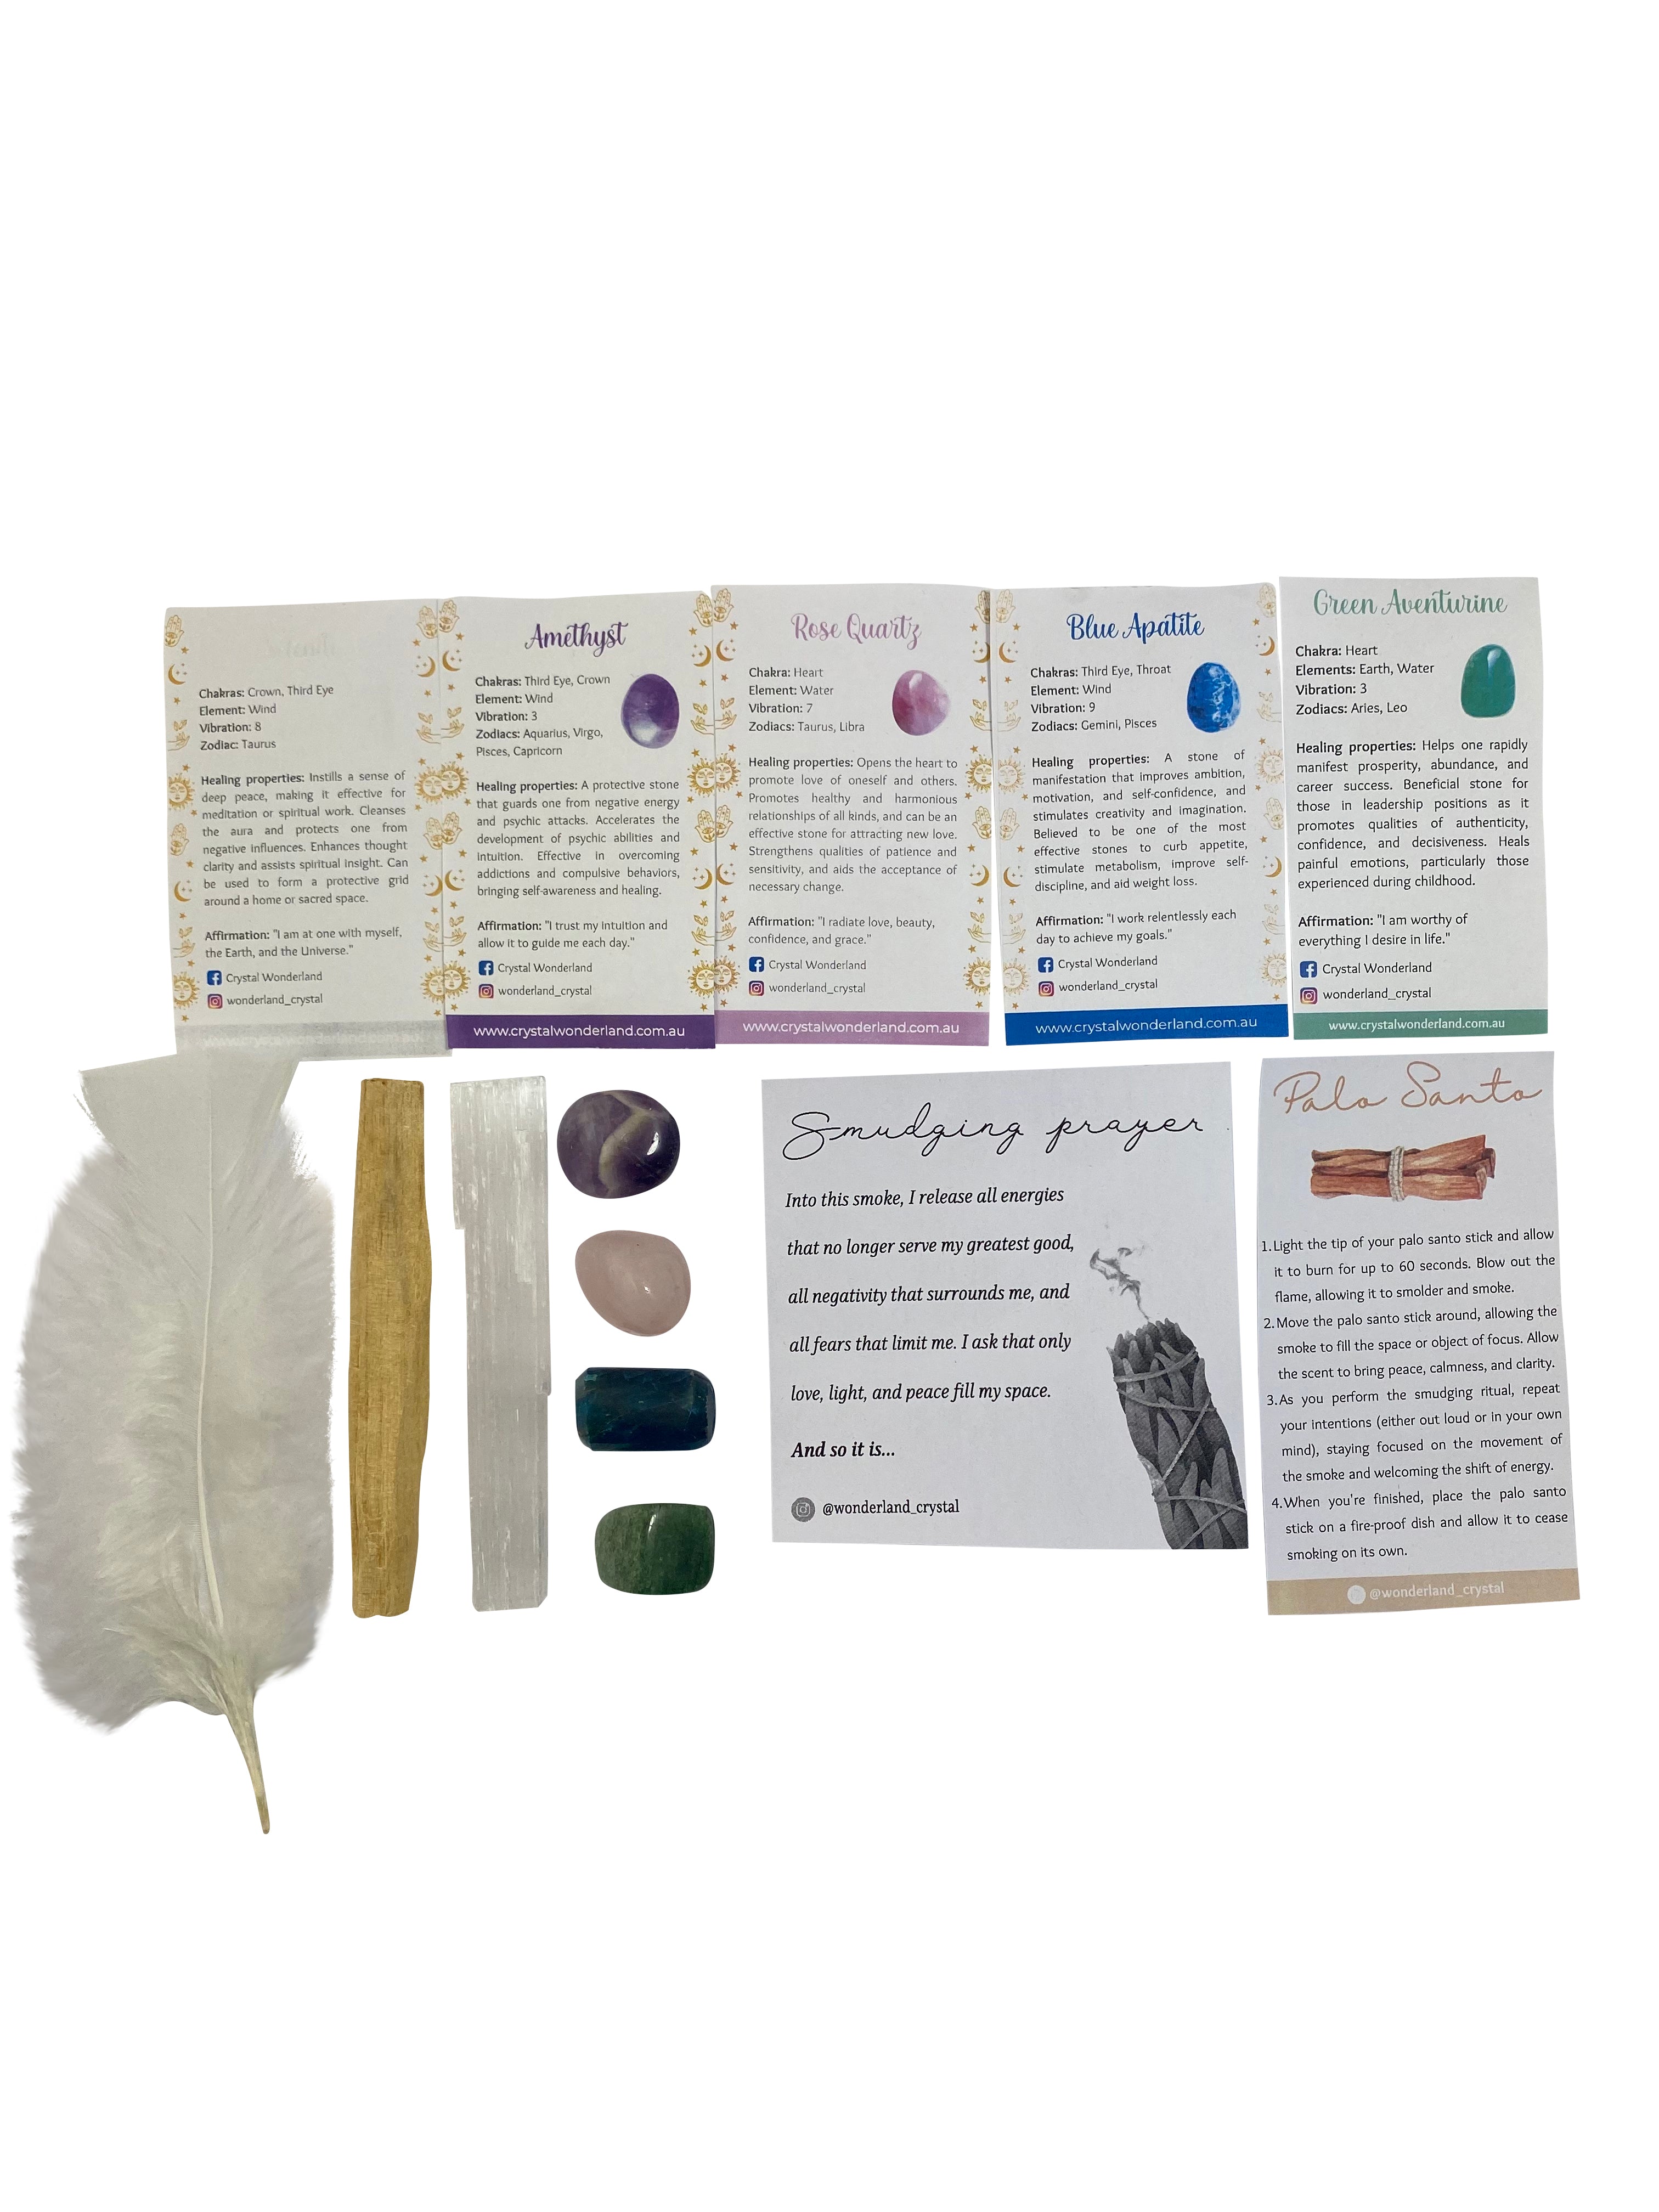 Crystals Tumbled & Smudge Gift Set A